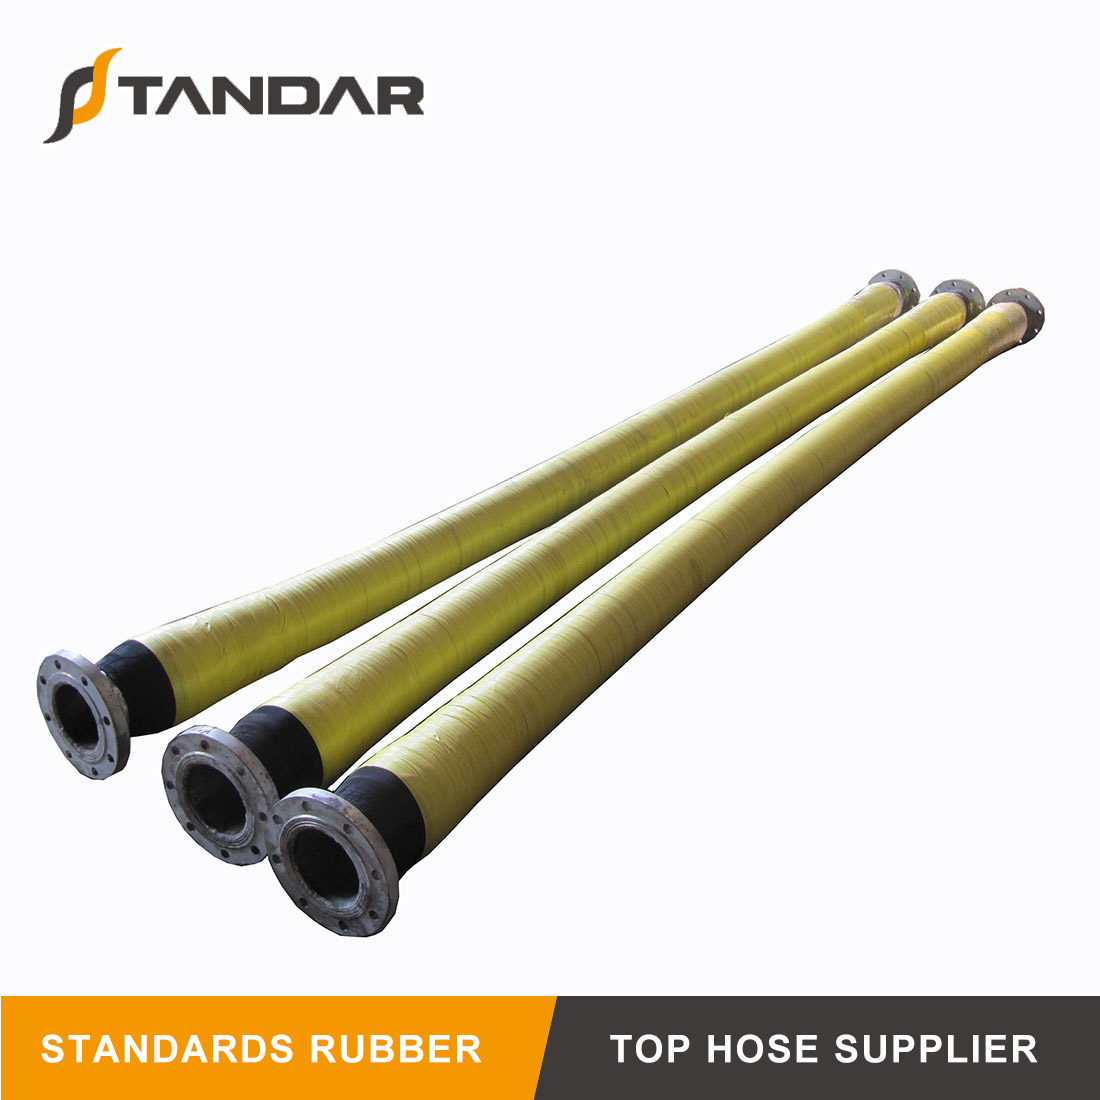 High Pressure Industrial Water Suction Discharge Hose